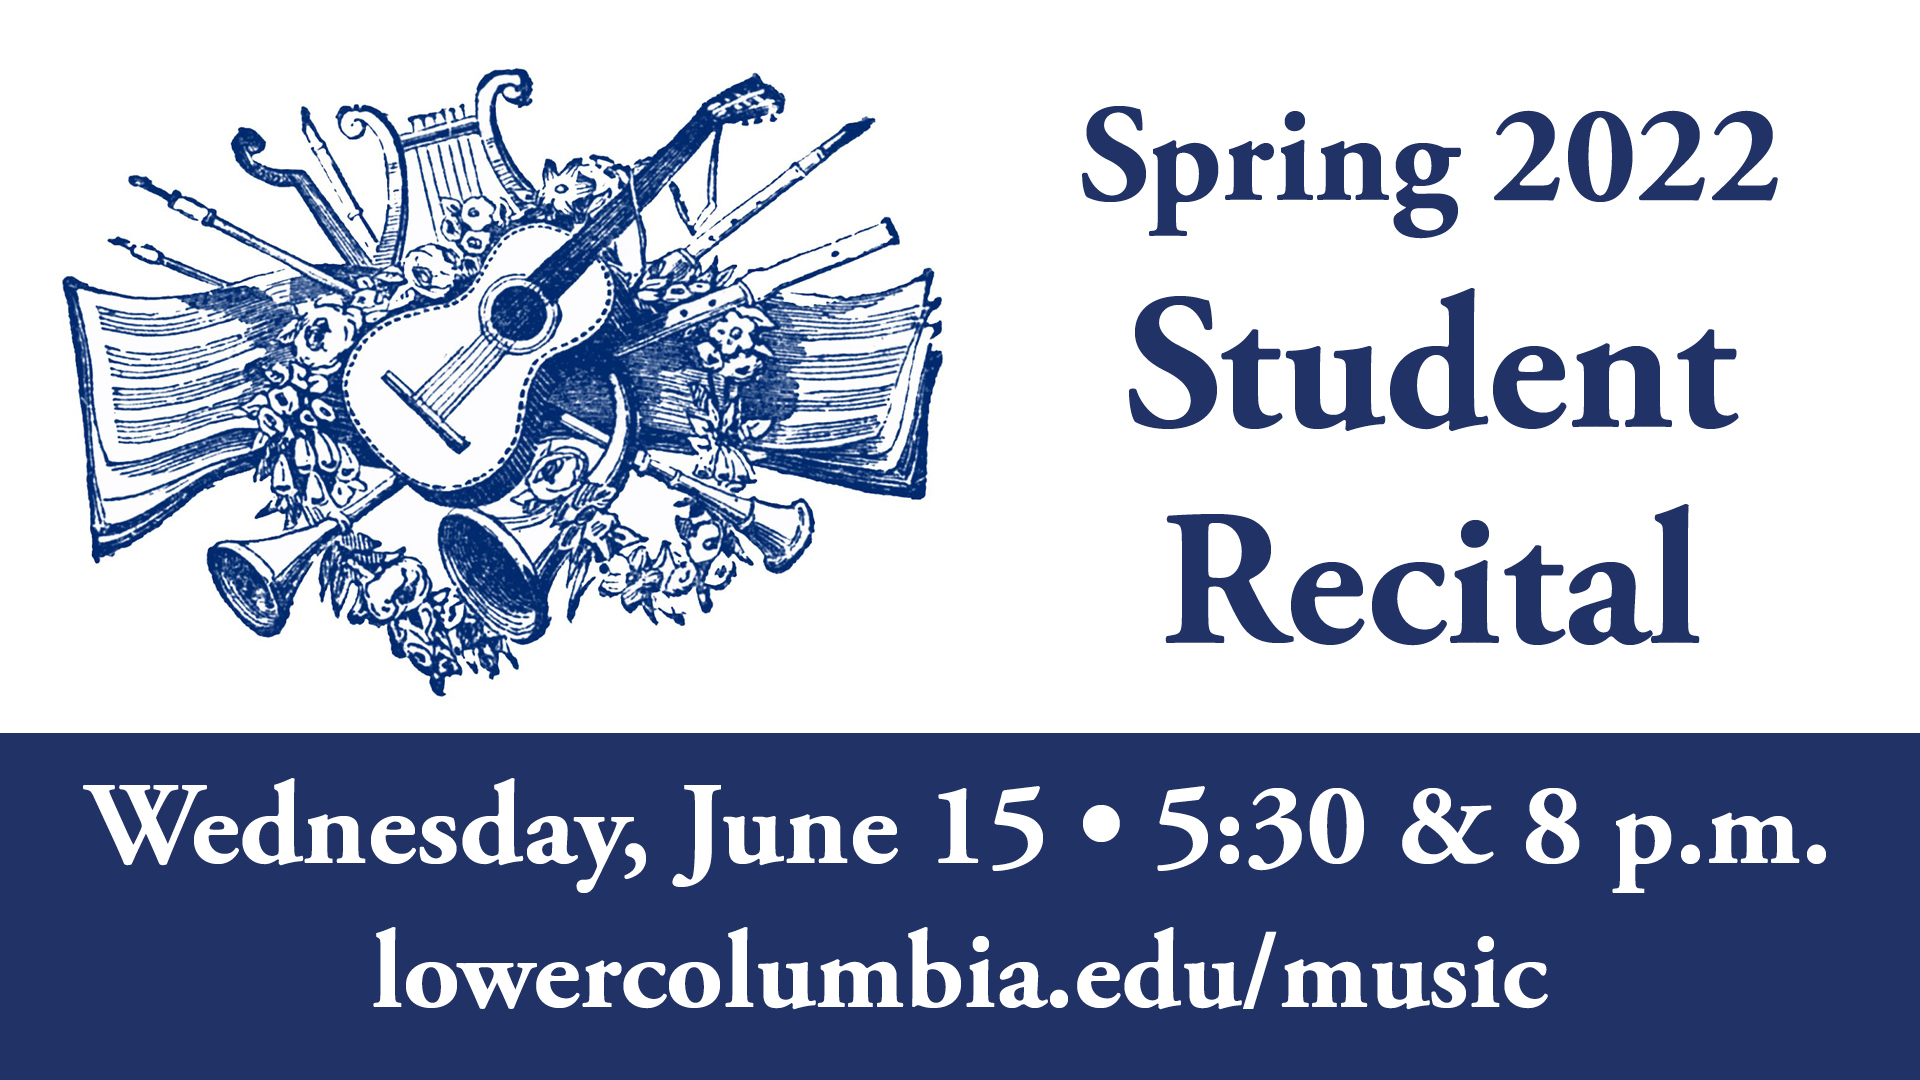 Blue and white banner with guitar and instruments for Spring 2022 Student receitall, June 15 at 5:30pm